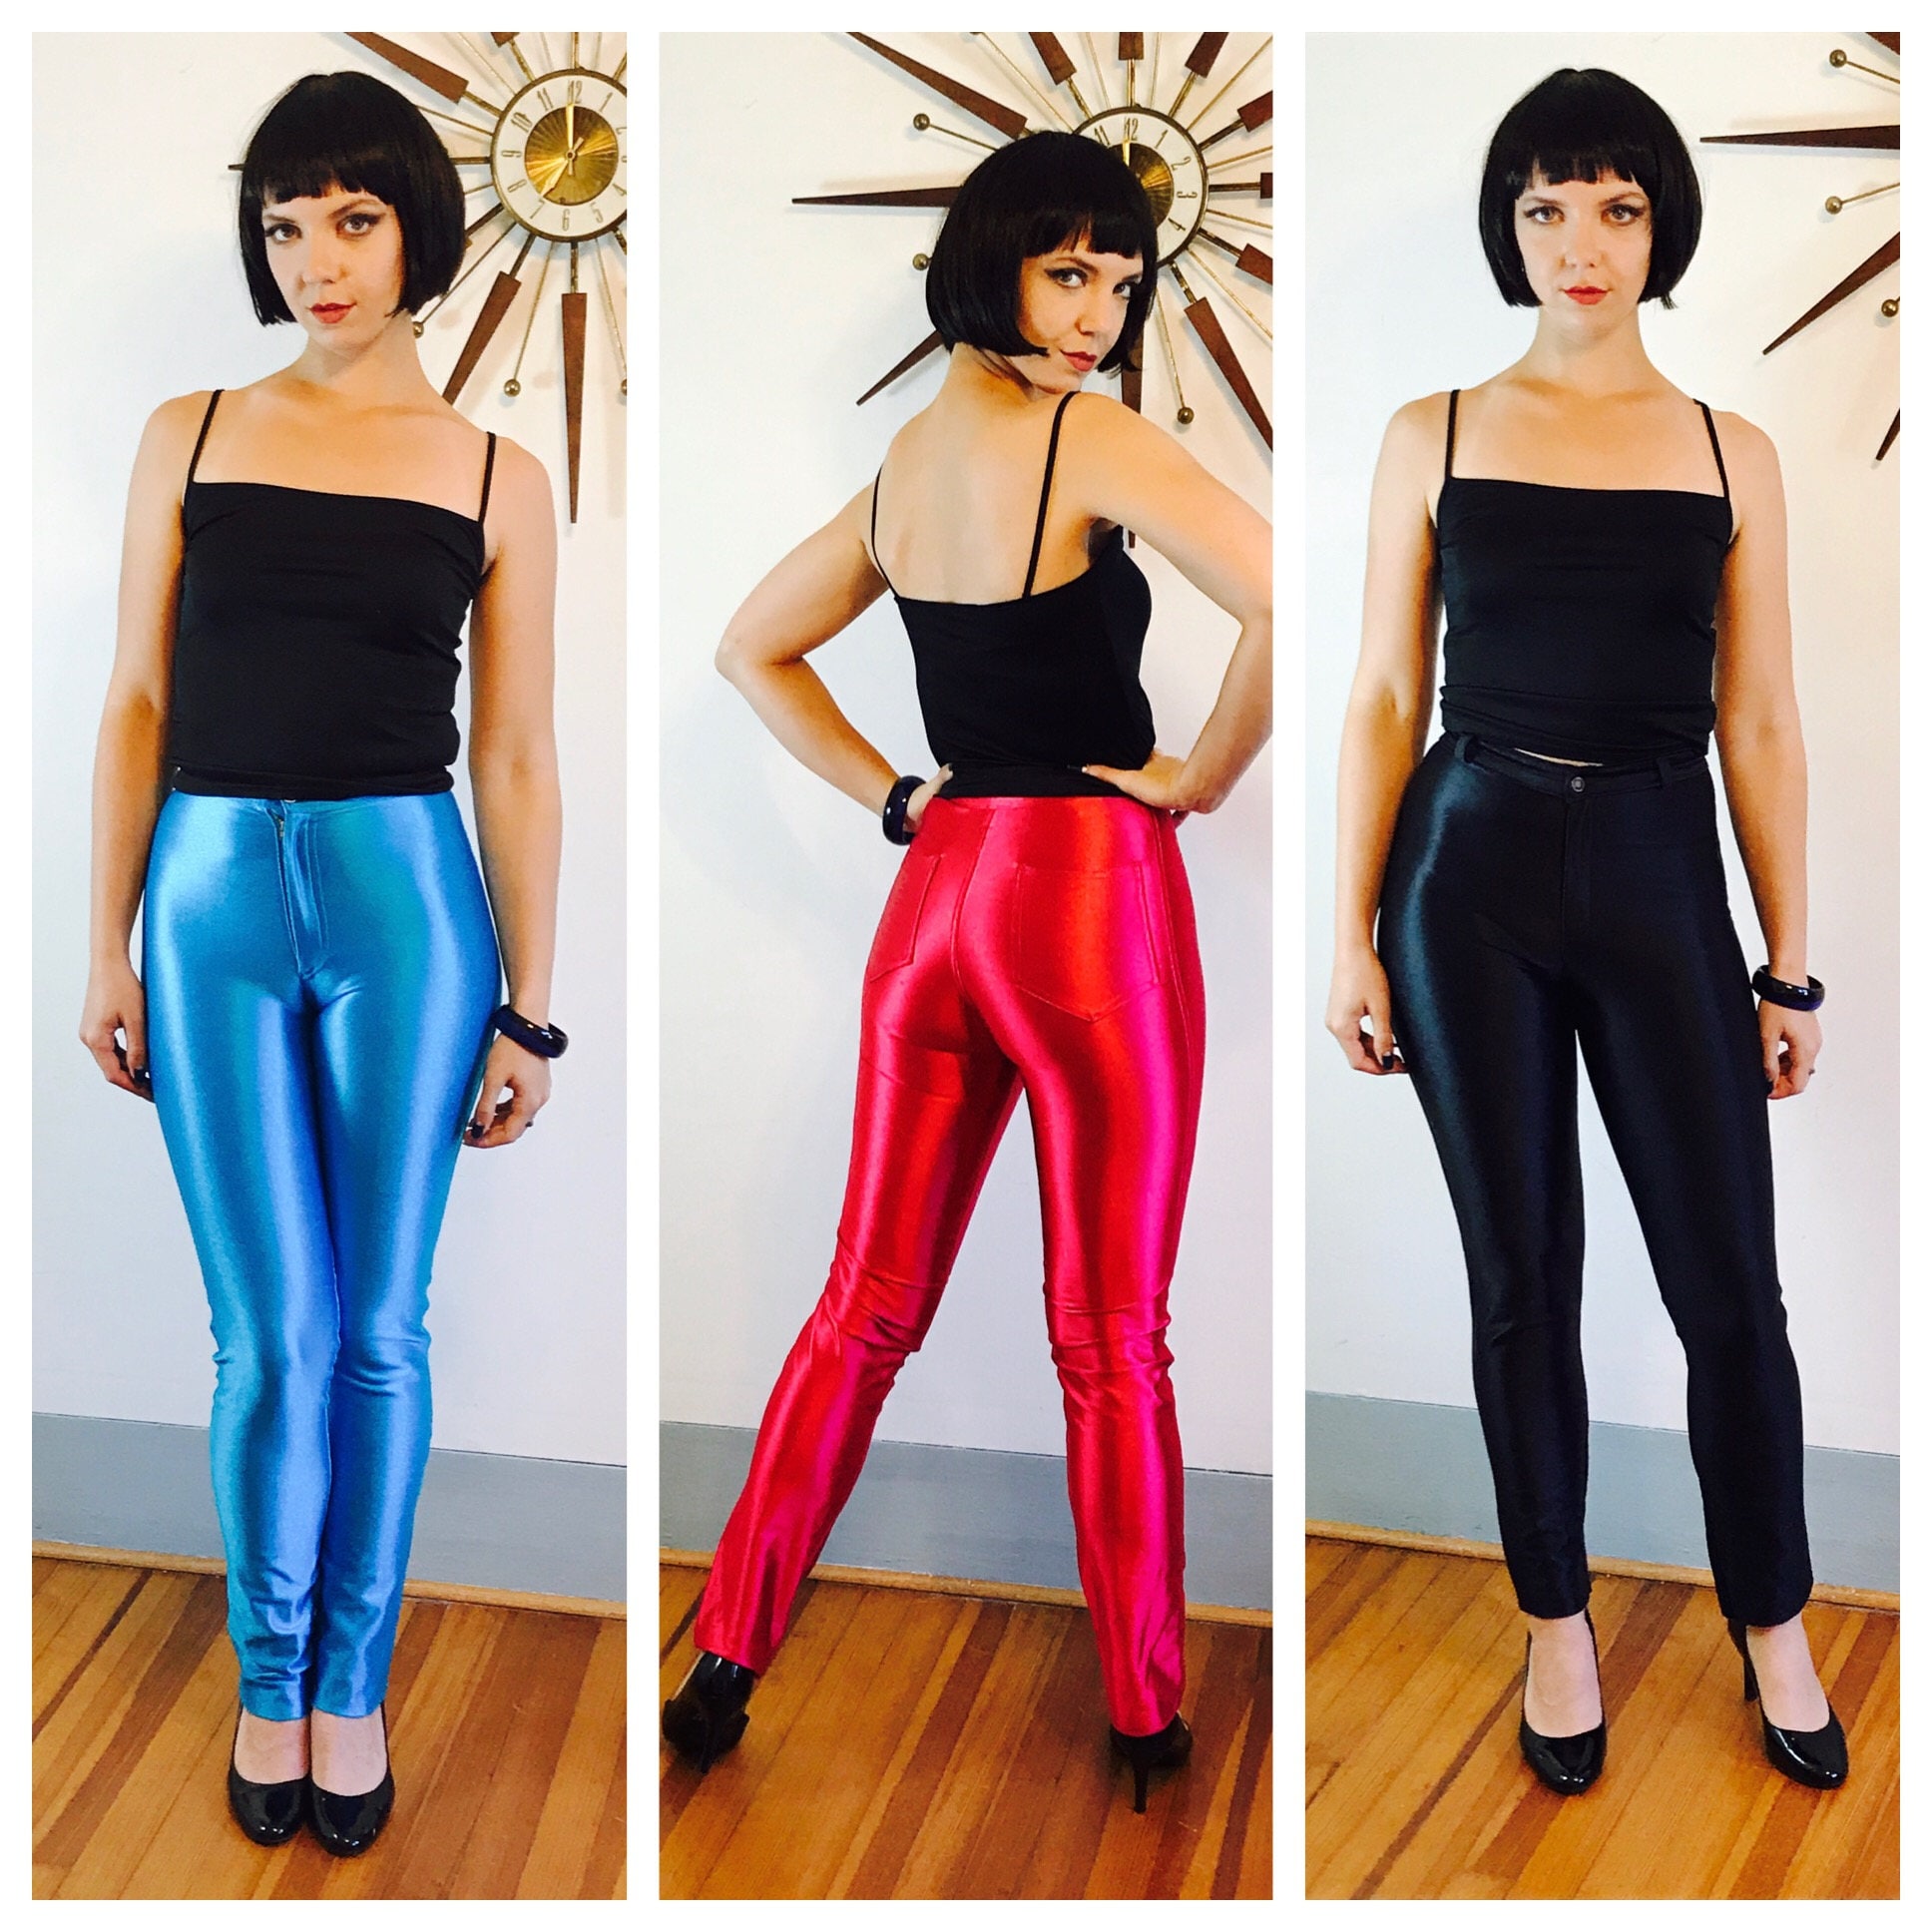 These are such hot vintage 70s disco pants!! 